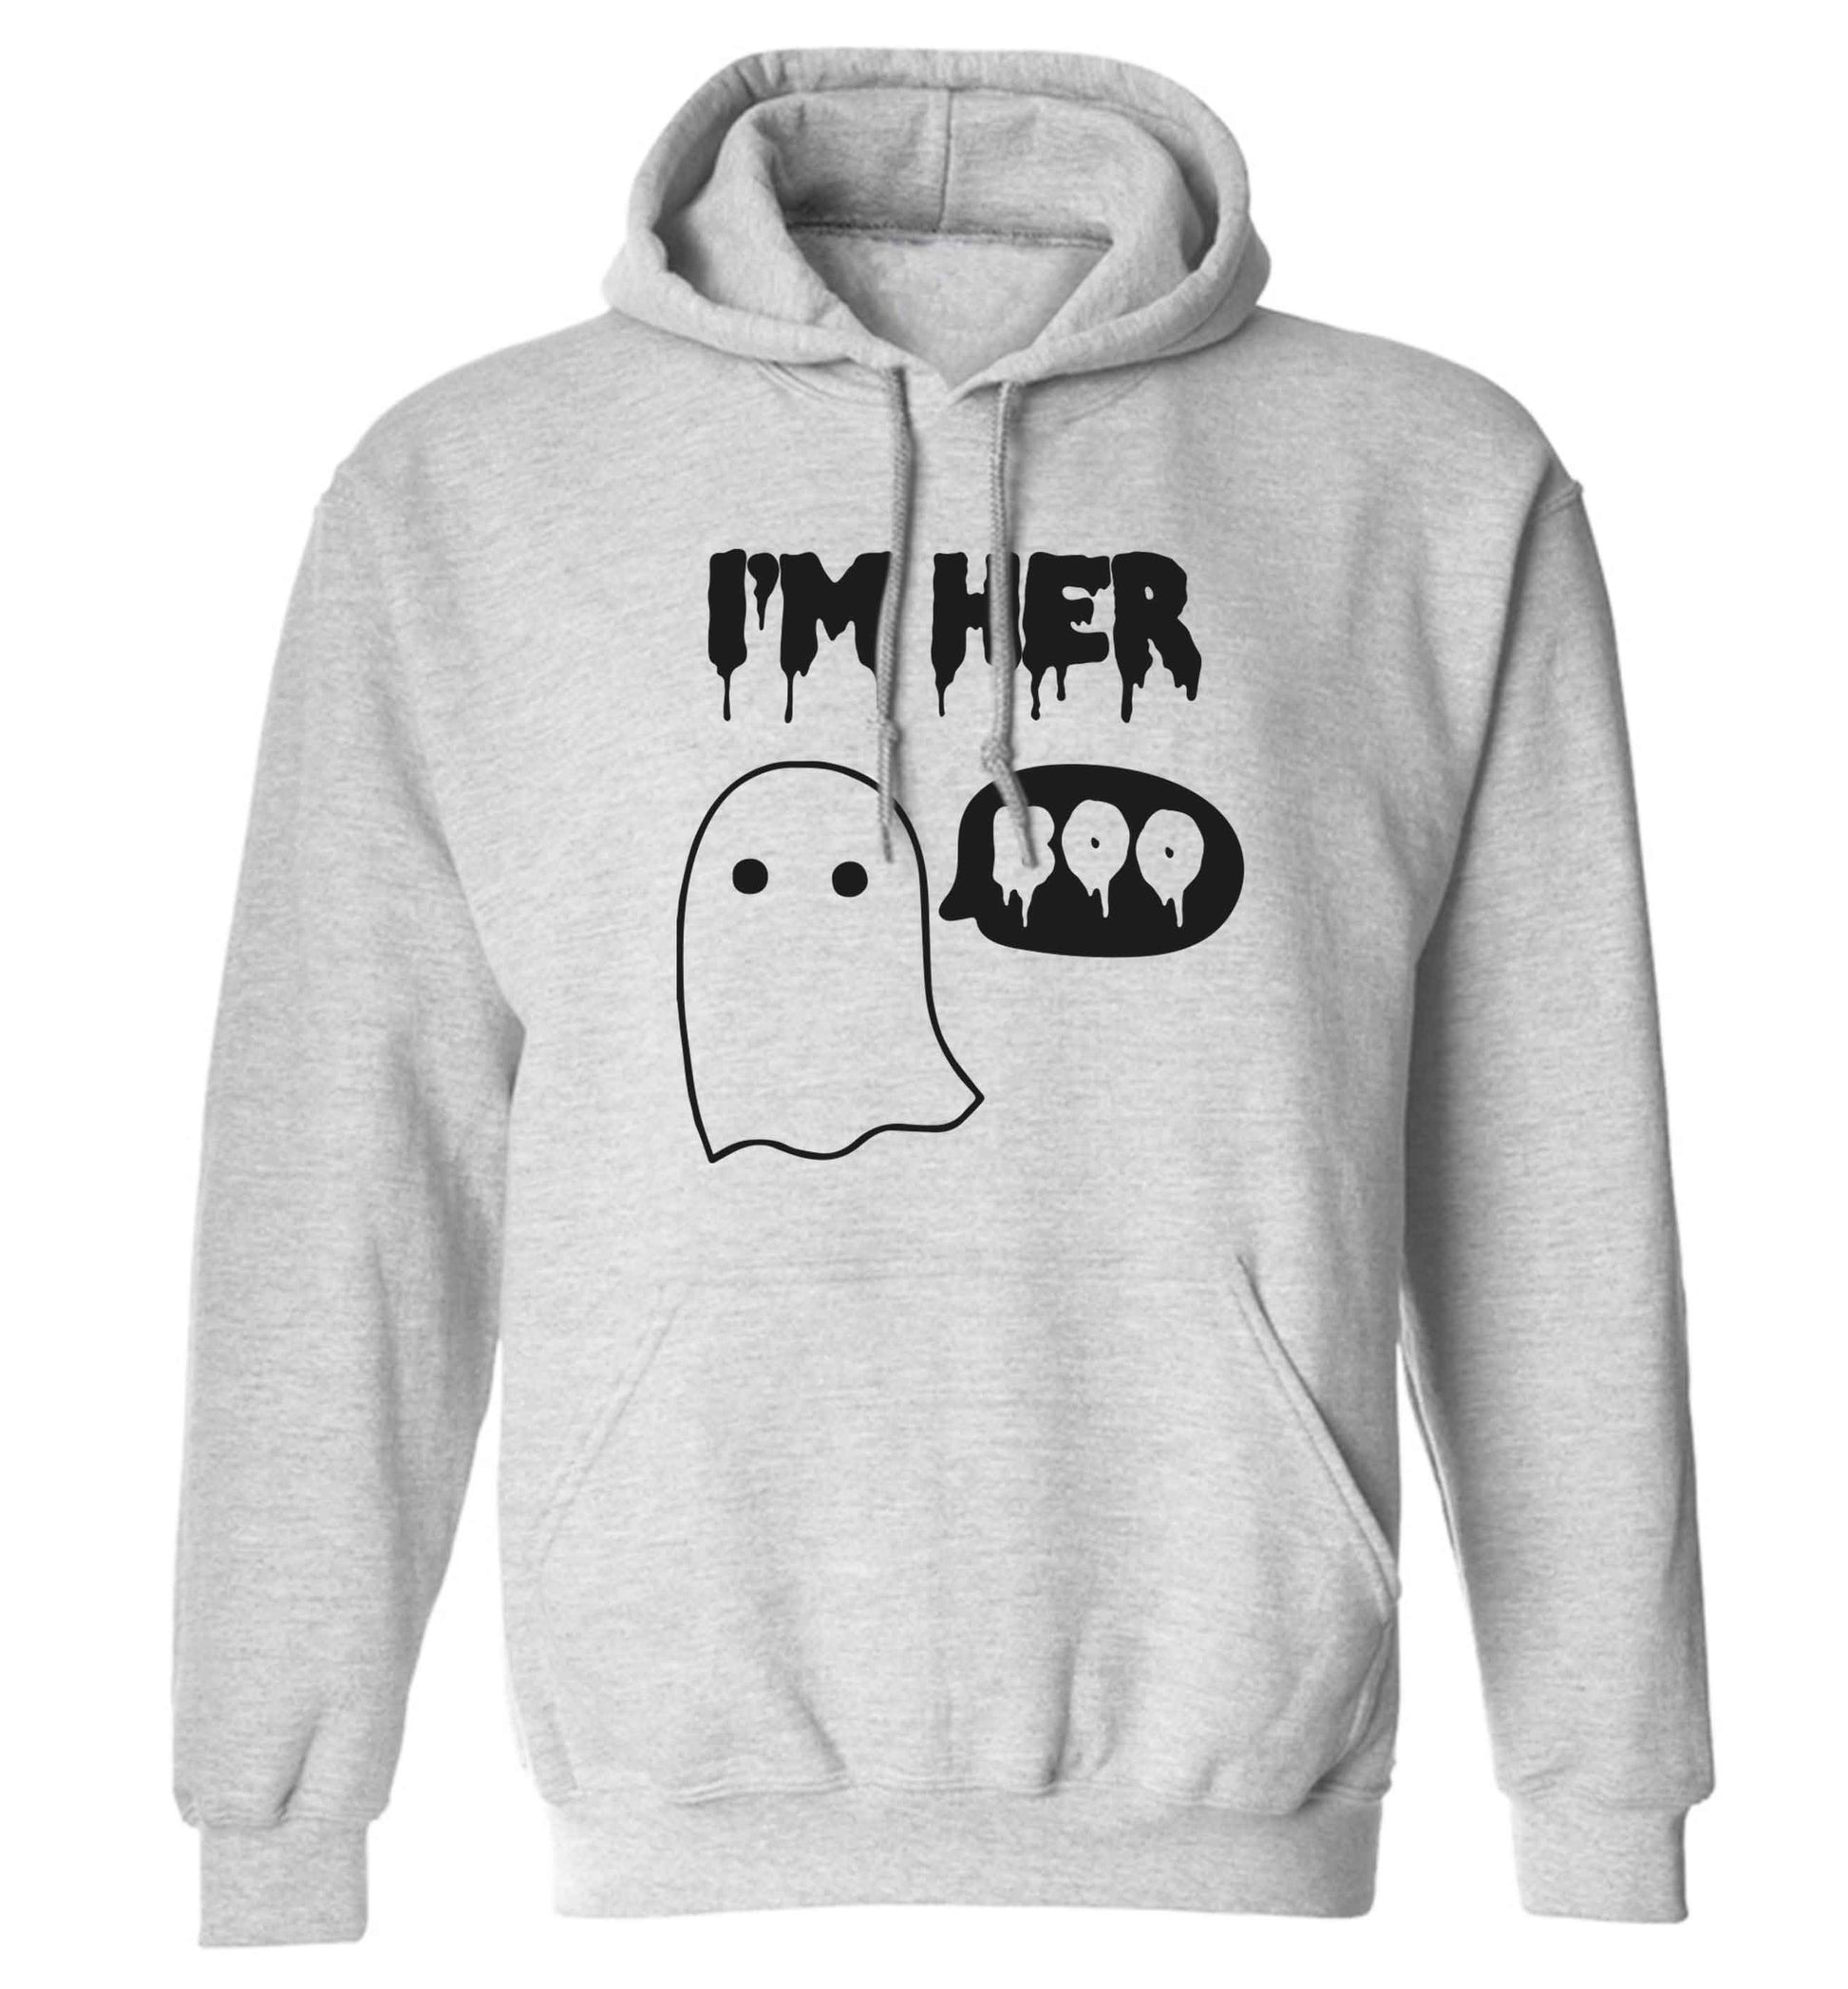 I'm her boo adults unisex grey hoodie 2XL